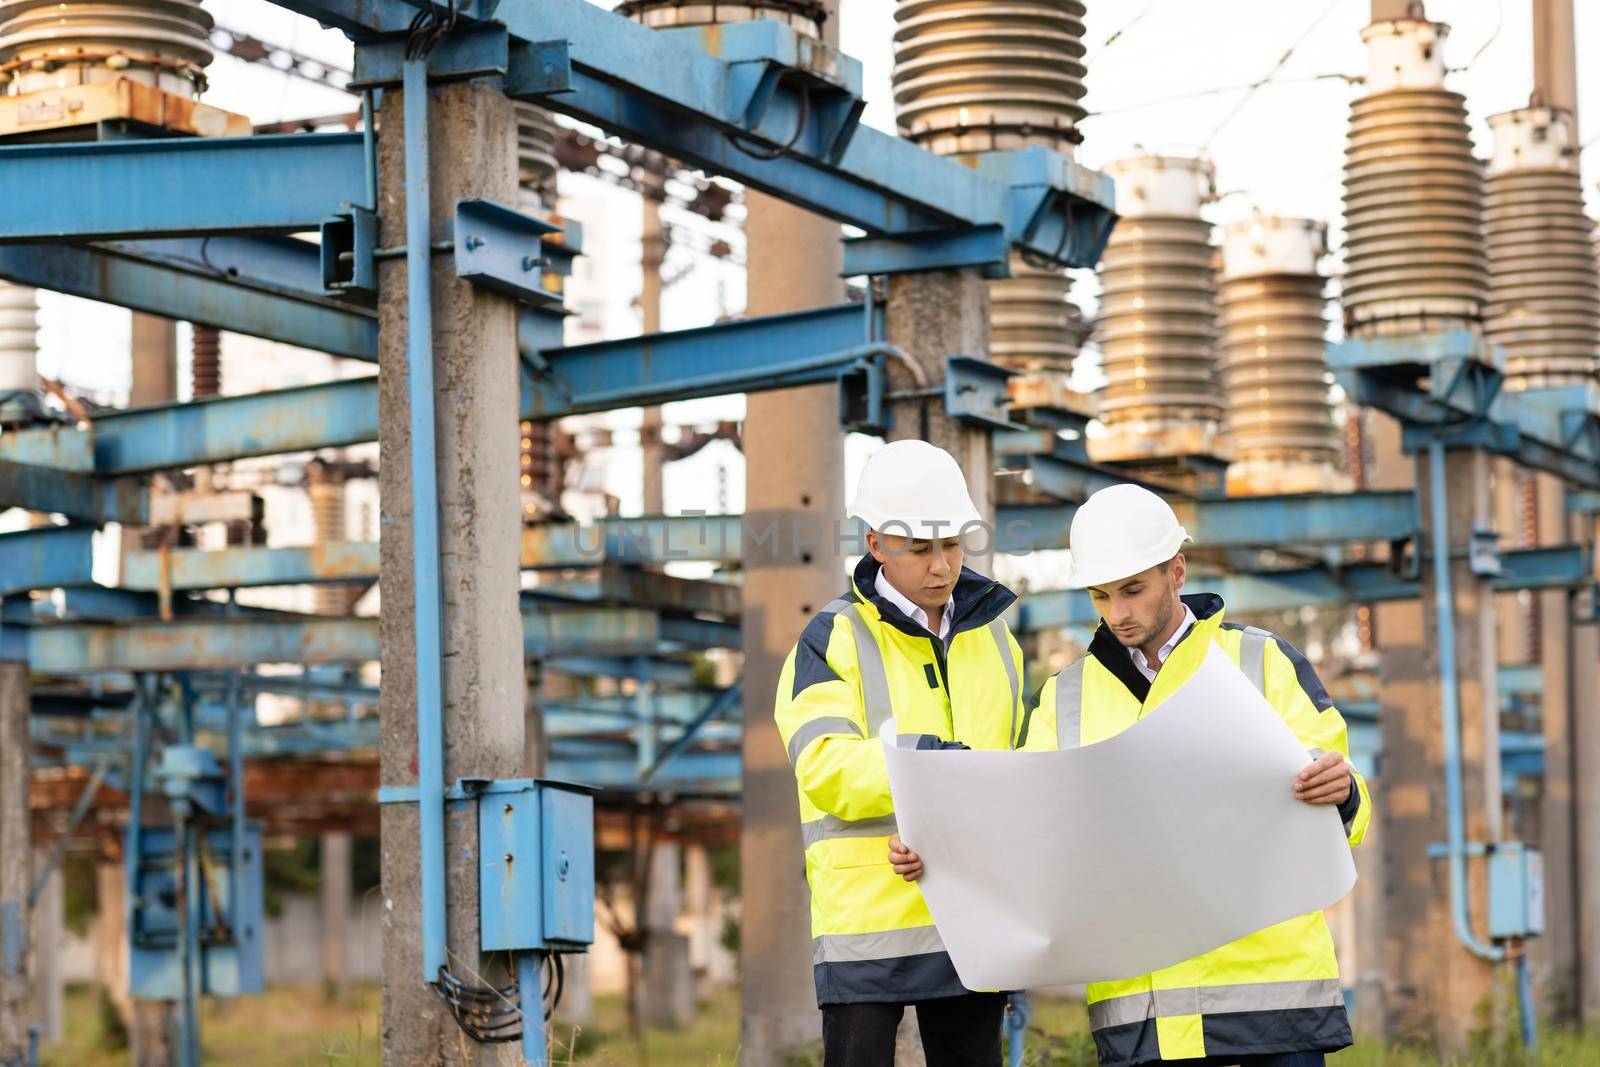 Engineers in special clothing are working on site. Two engineers discuss a drawing on paper in the open air against the background of a high-voltage power line by uflypro